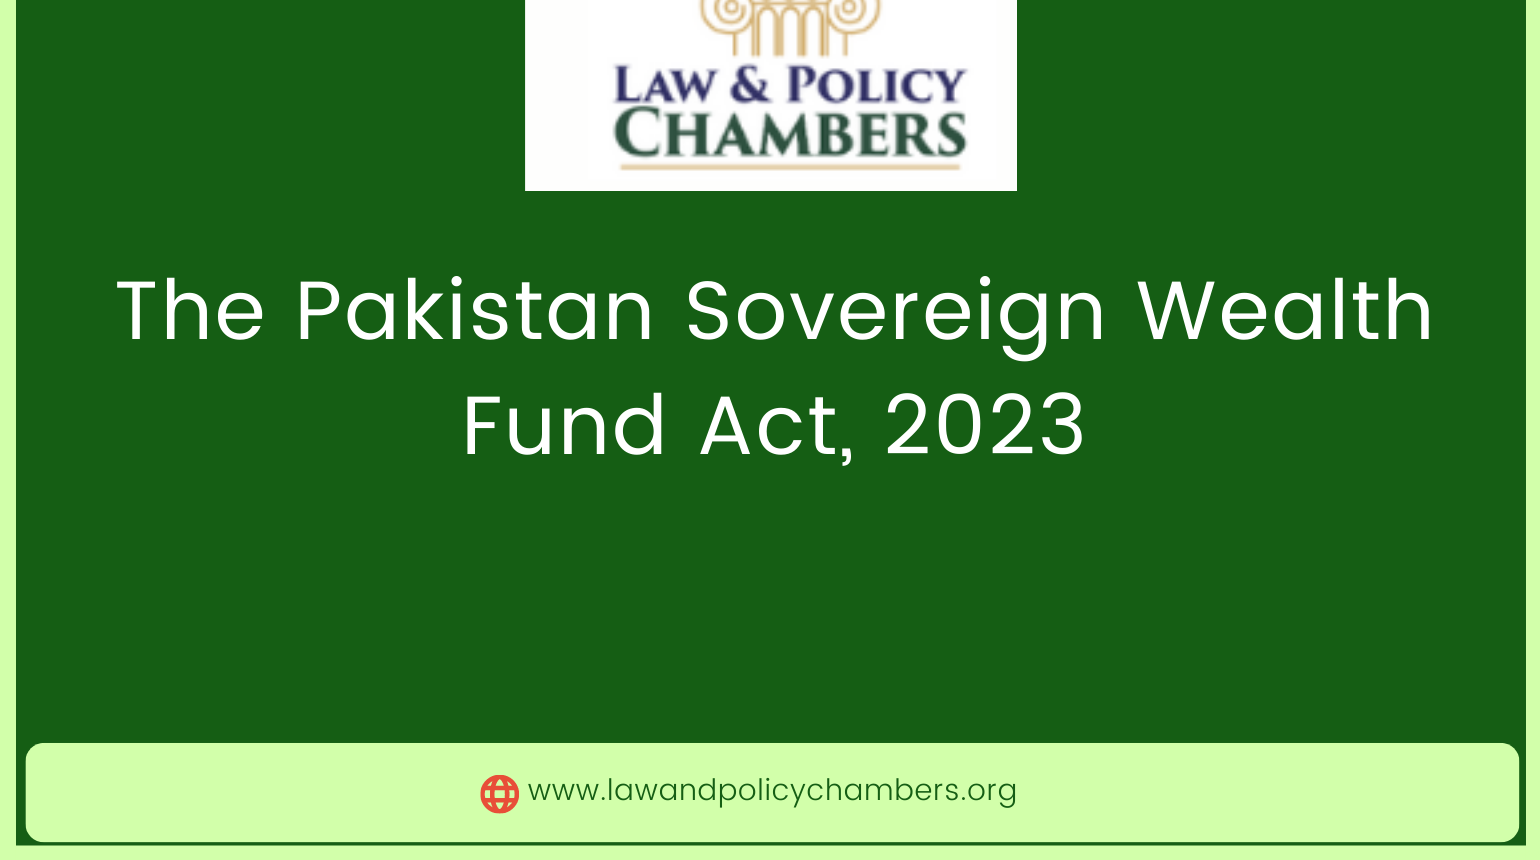 The Pakistan Sovereign Wealth Fund Act, 2023